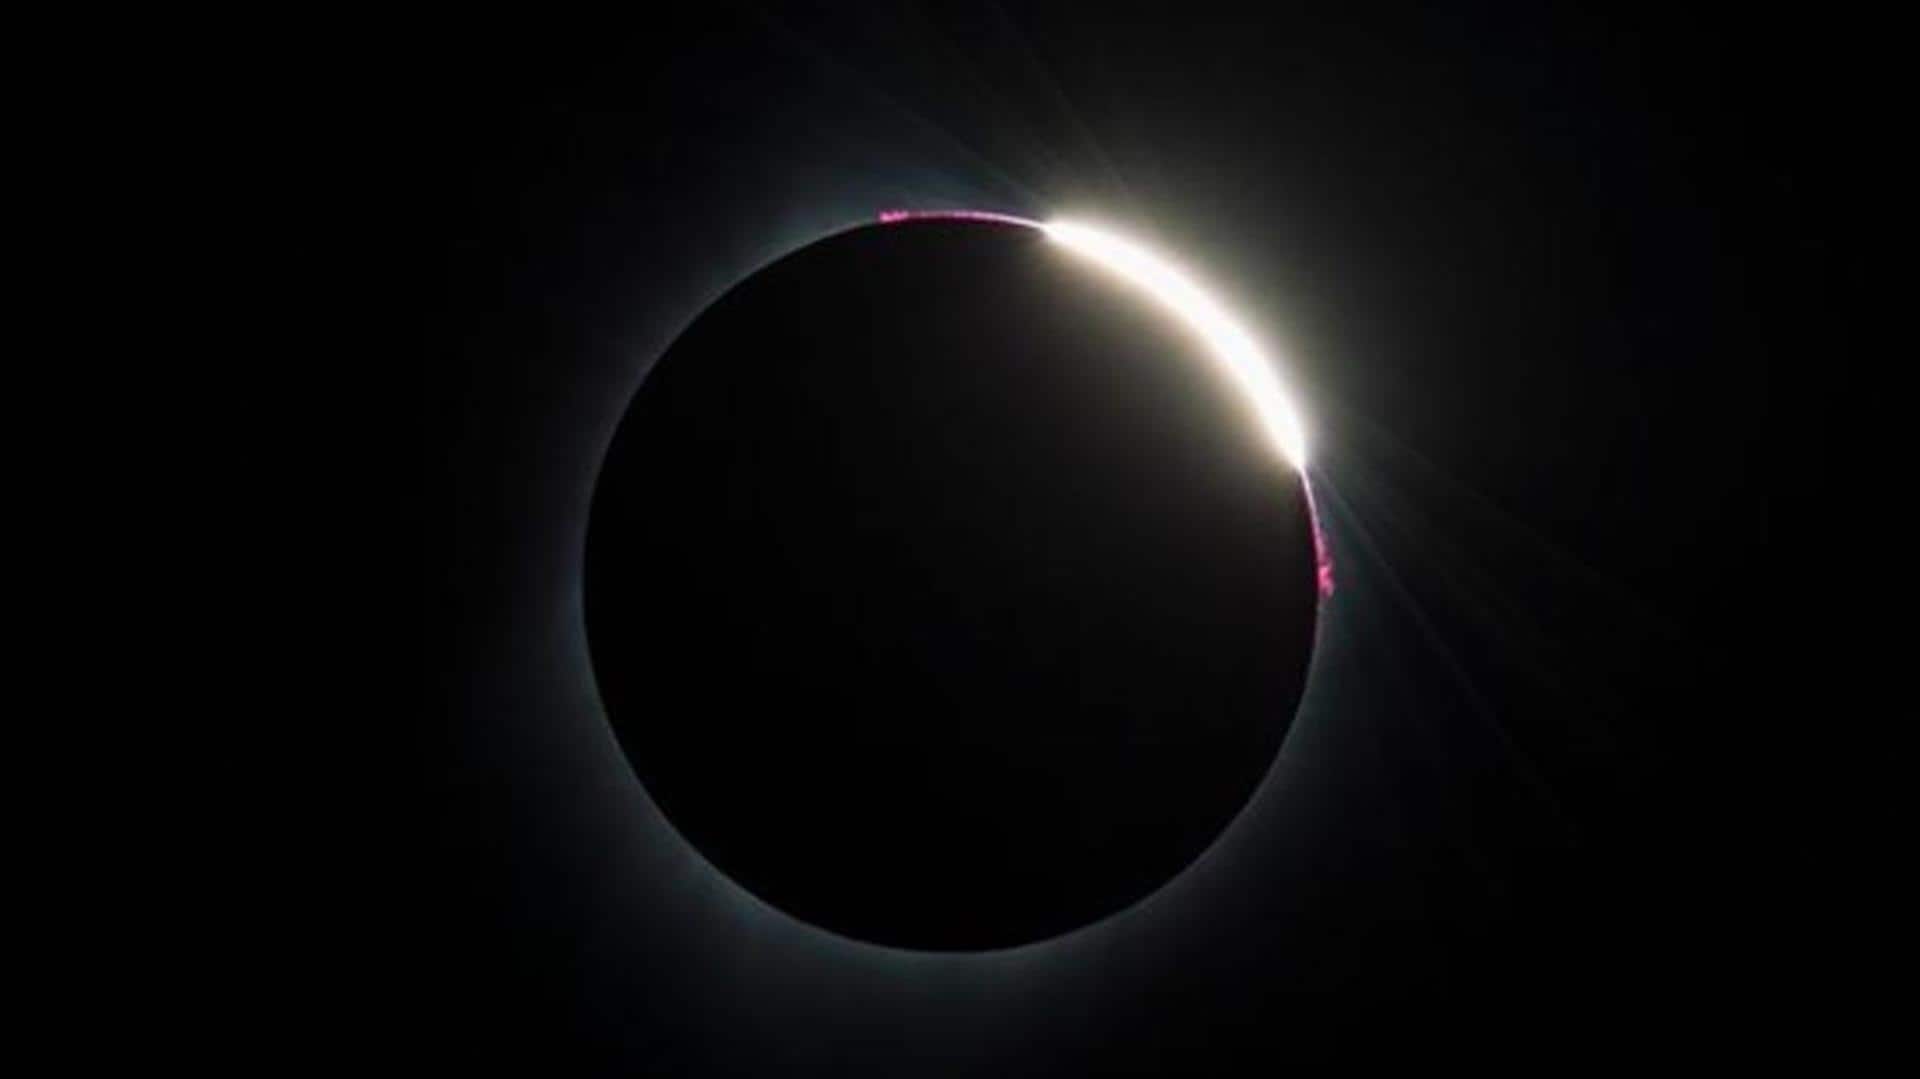 Hybrid solar eclipse on April 20: How to watch